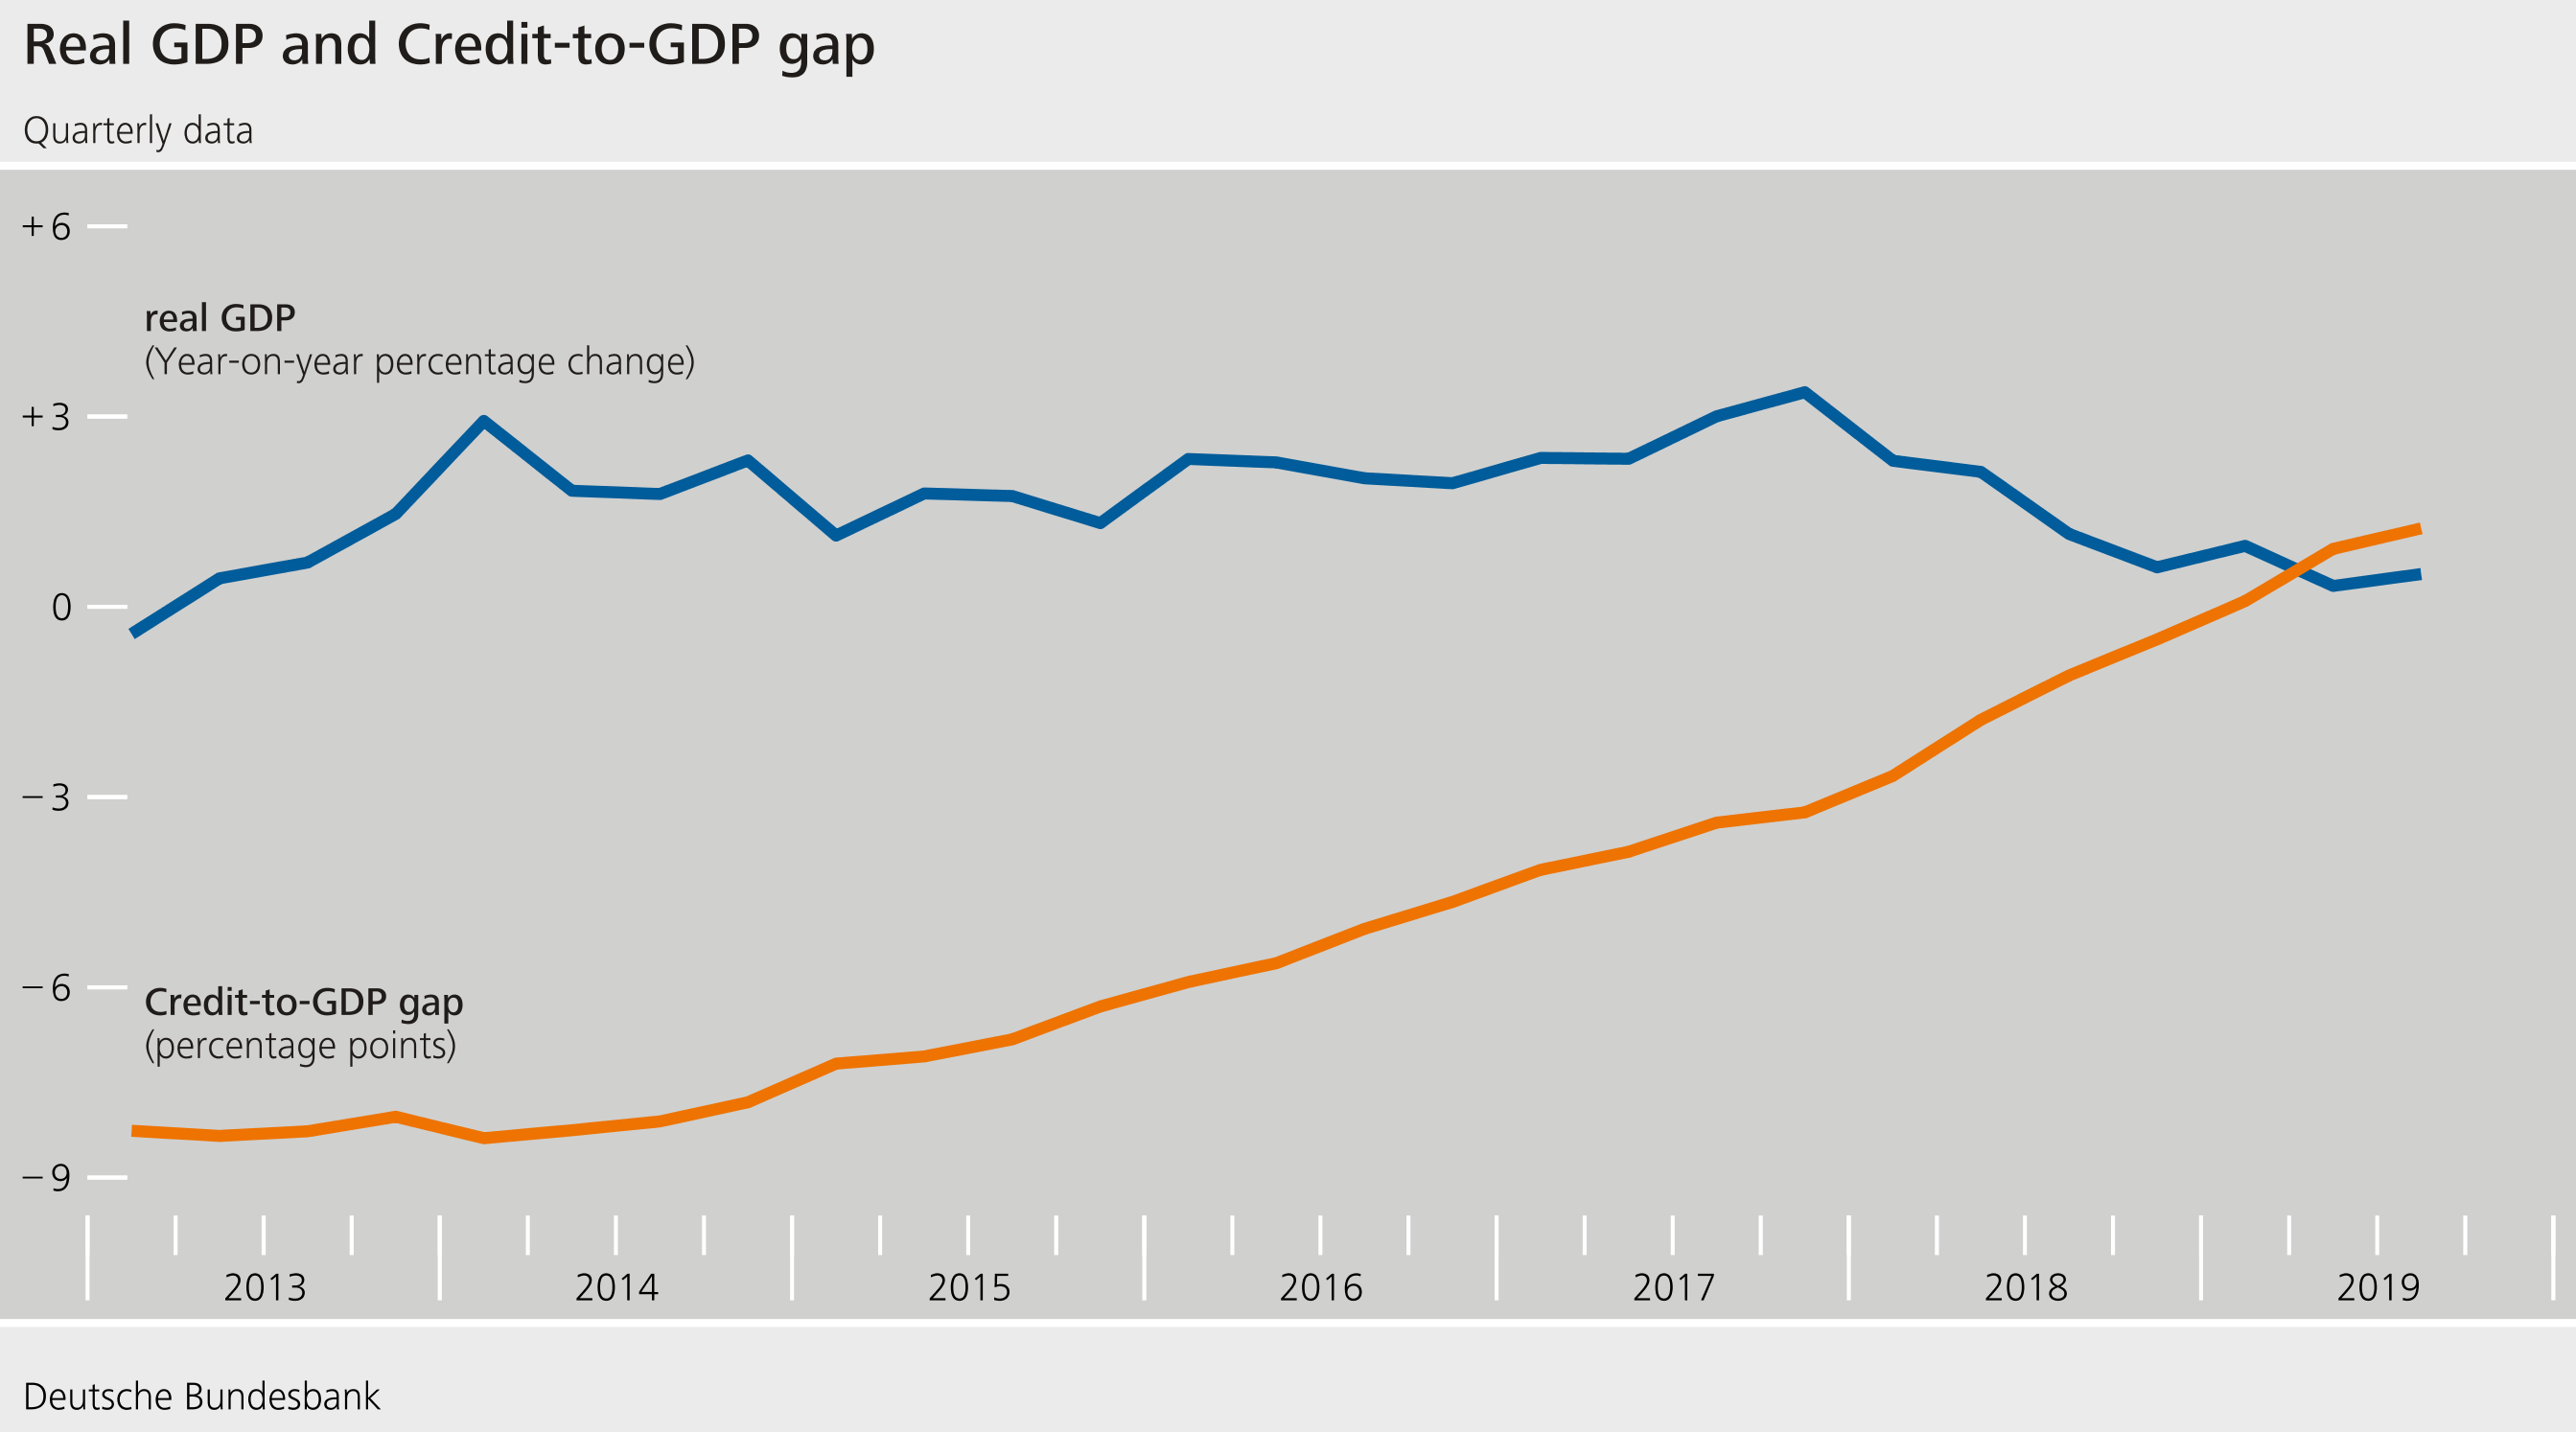 Real GDP and Credit-to-GDP gap